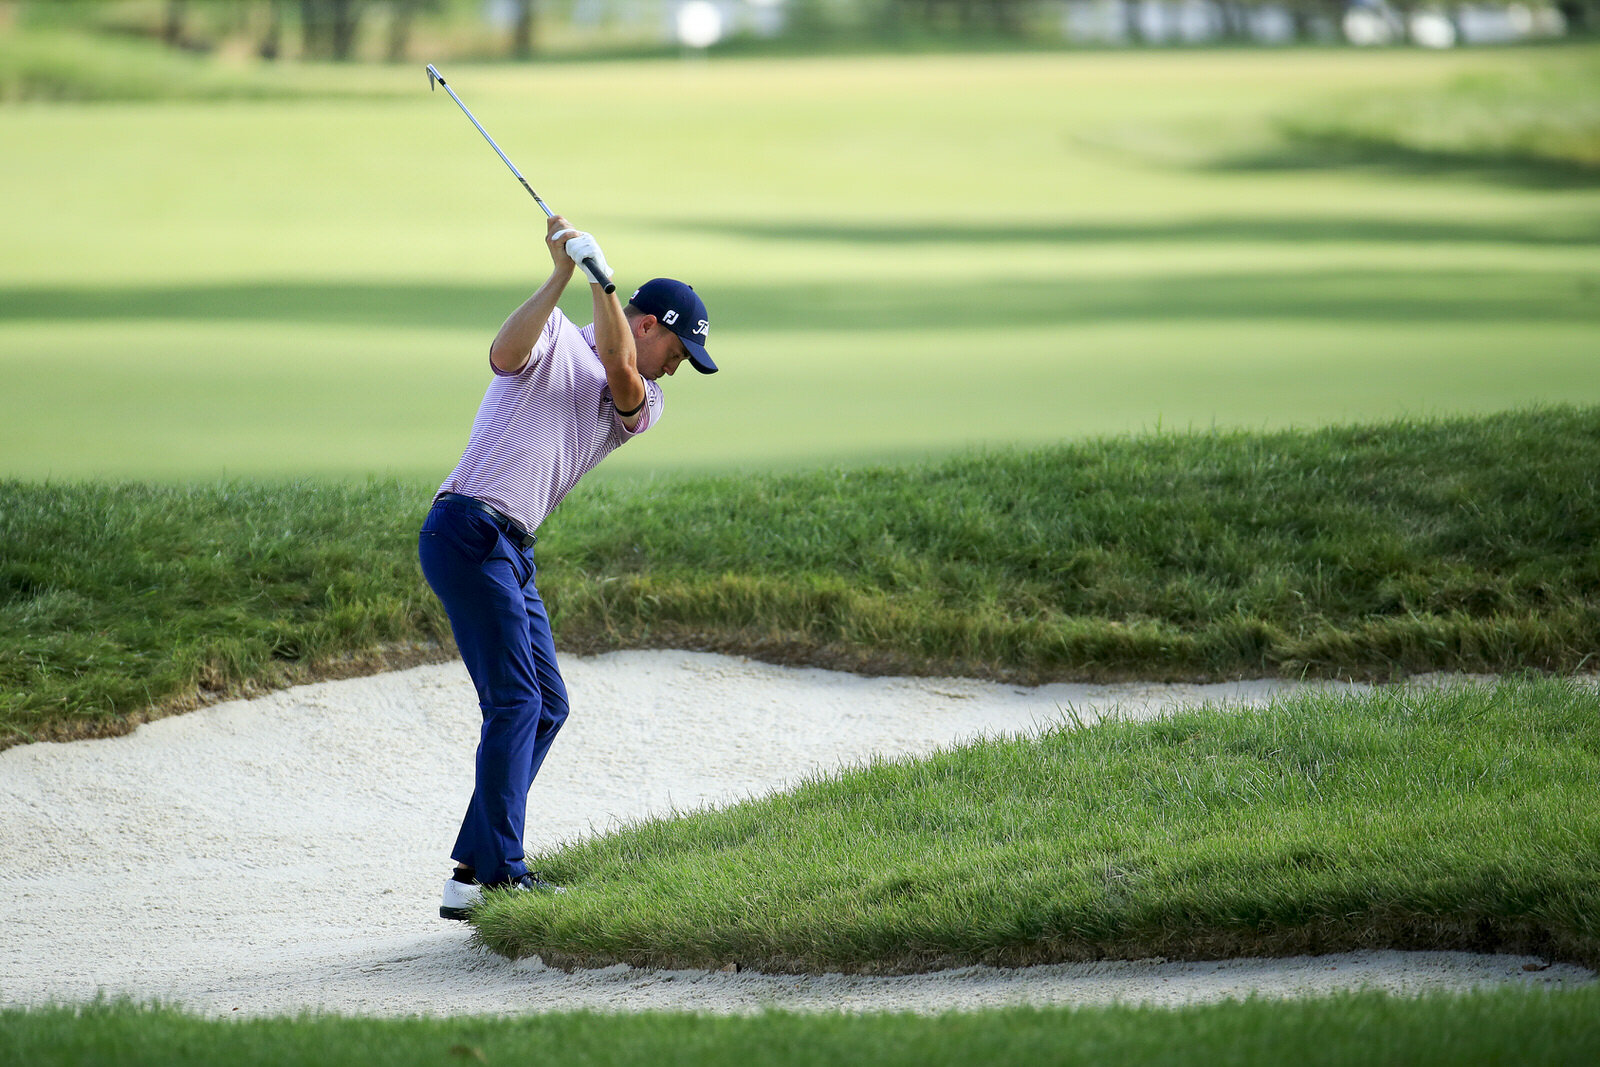  OLYMPIA FIELDS, ILLINOIS - AUGUST 29: Justin Thomas of the United States plays a second shot from a bunker on the first hole during the third round of the BMW Championship on the North Course at Olympia Fields Country Club on August 29, 2020 in Olym